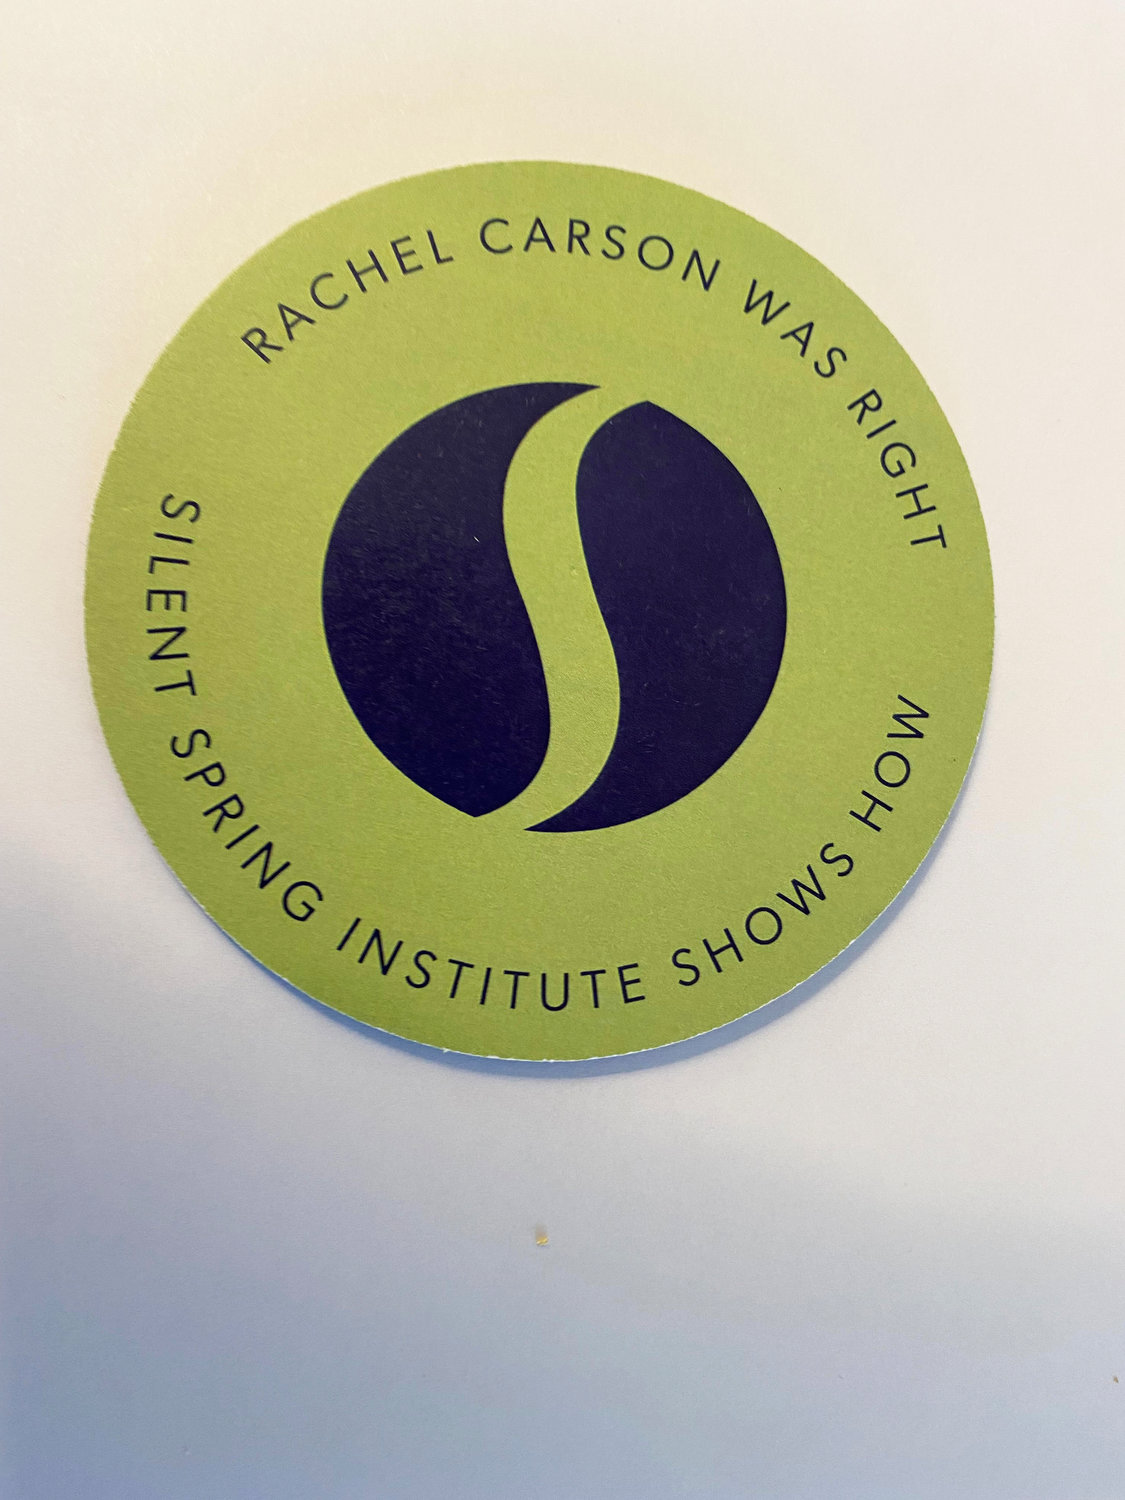 The Silent Spring Institute celebrated the 60th anniversary of the publication of Silent Spring by Rachel Carson on Wednesday, Oct. 12.